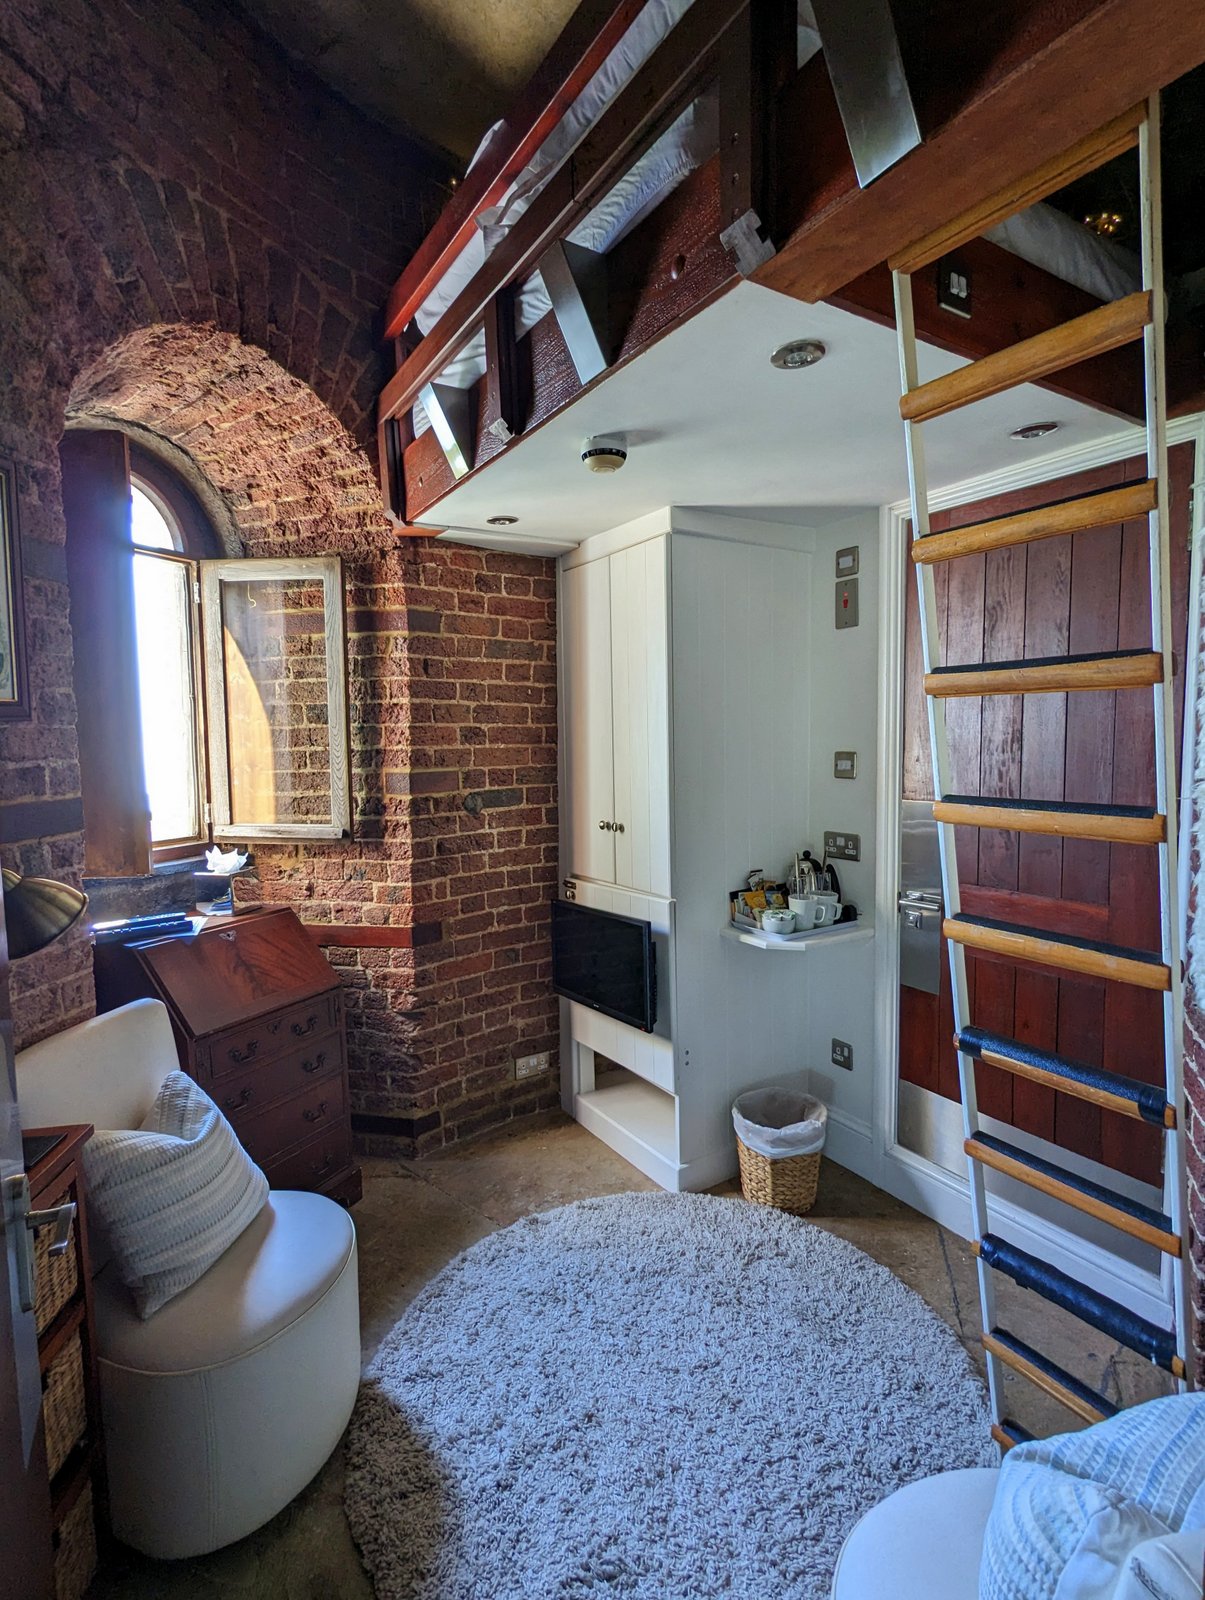 Hotel in a Lighthouse, Keepers Loft